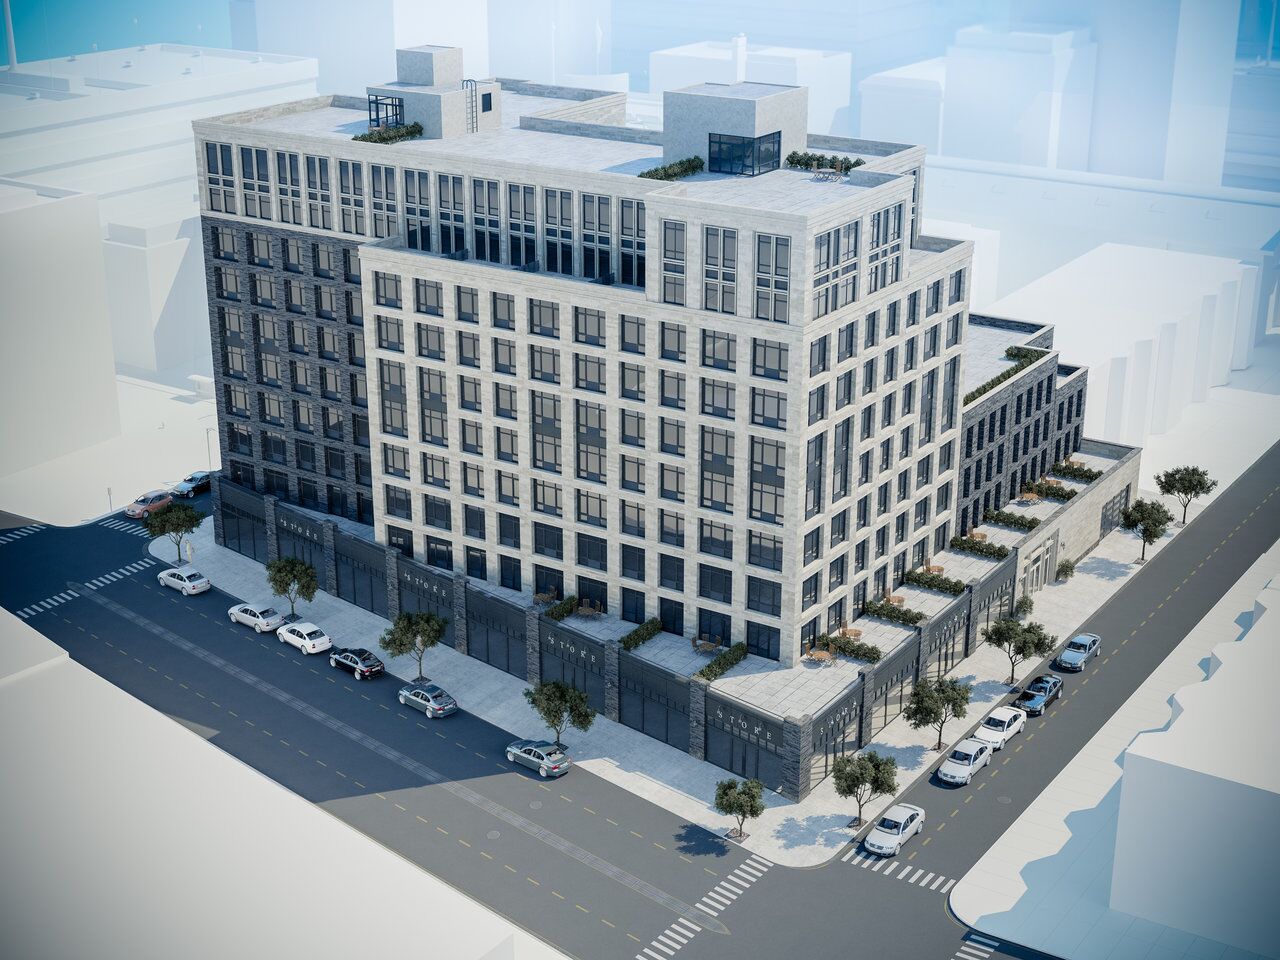 1535 Bedford Avenue. rendering by Issac and Stern Architects